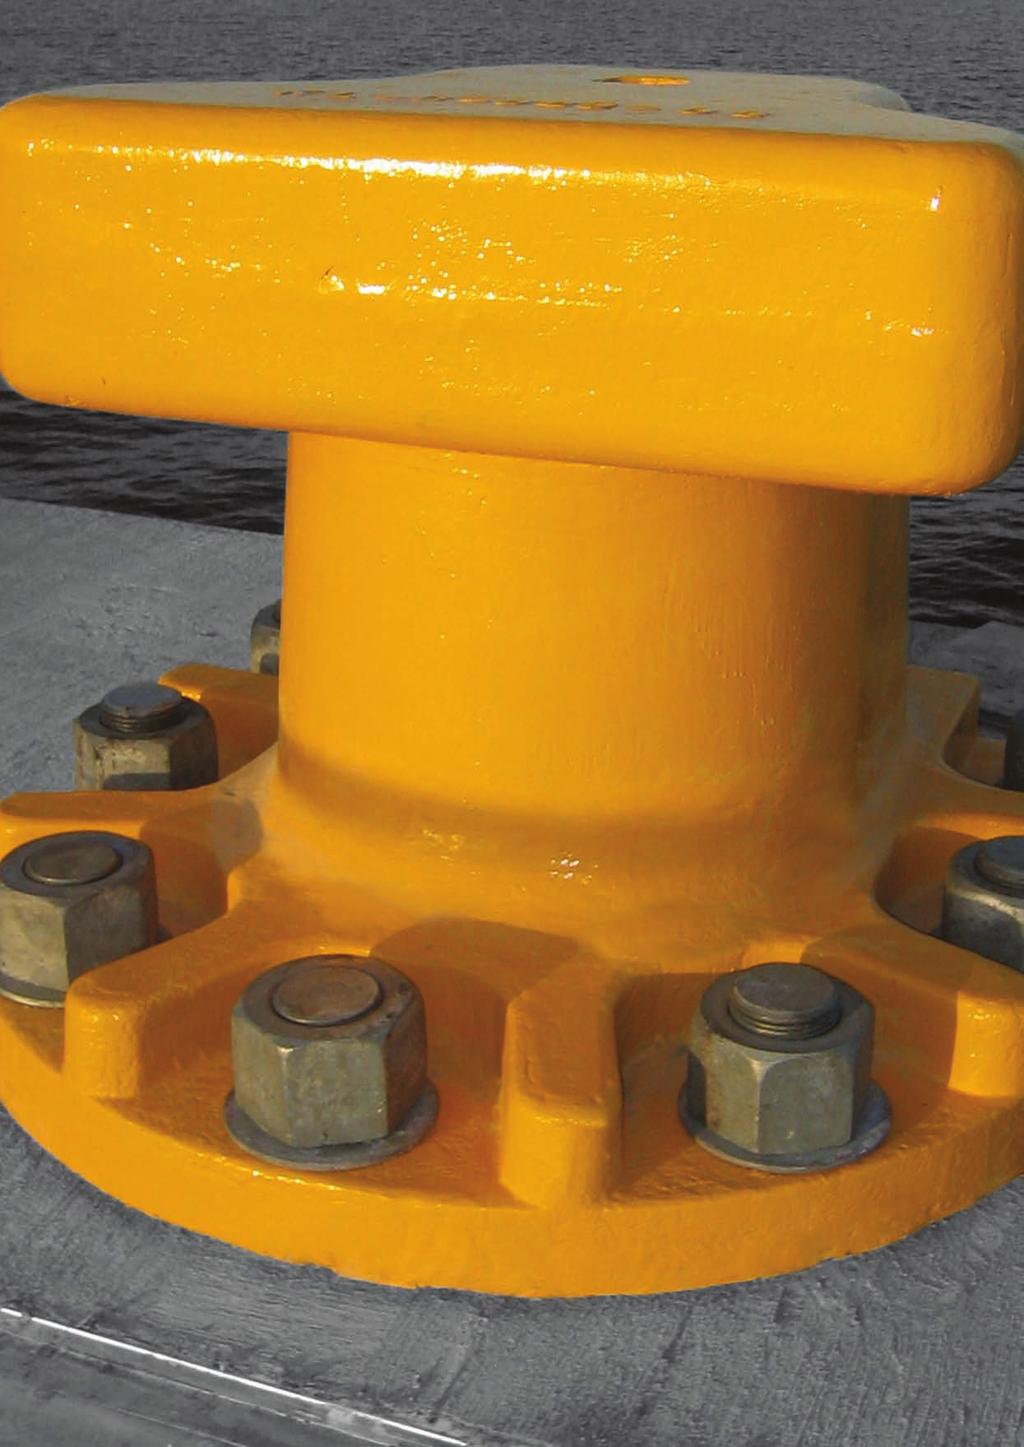 Introduction Maritime International is a leading manufacturer of marine bollards and cleats worldwide. Our range of bollards and cleats is unsurpassed by any other manufacturer or supplier.